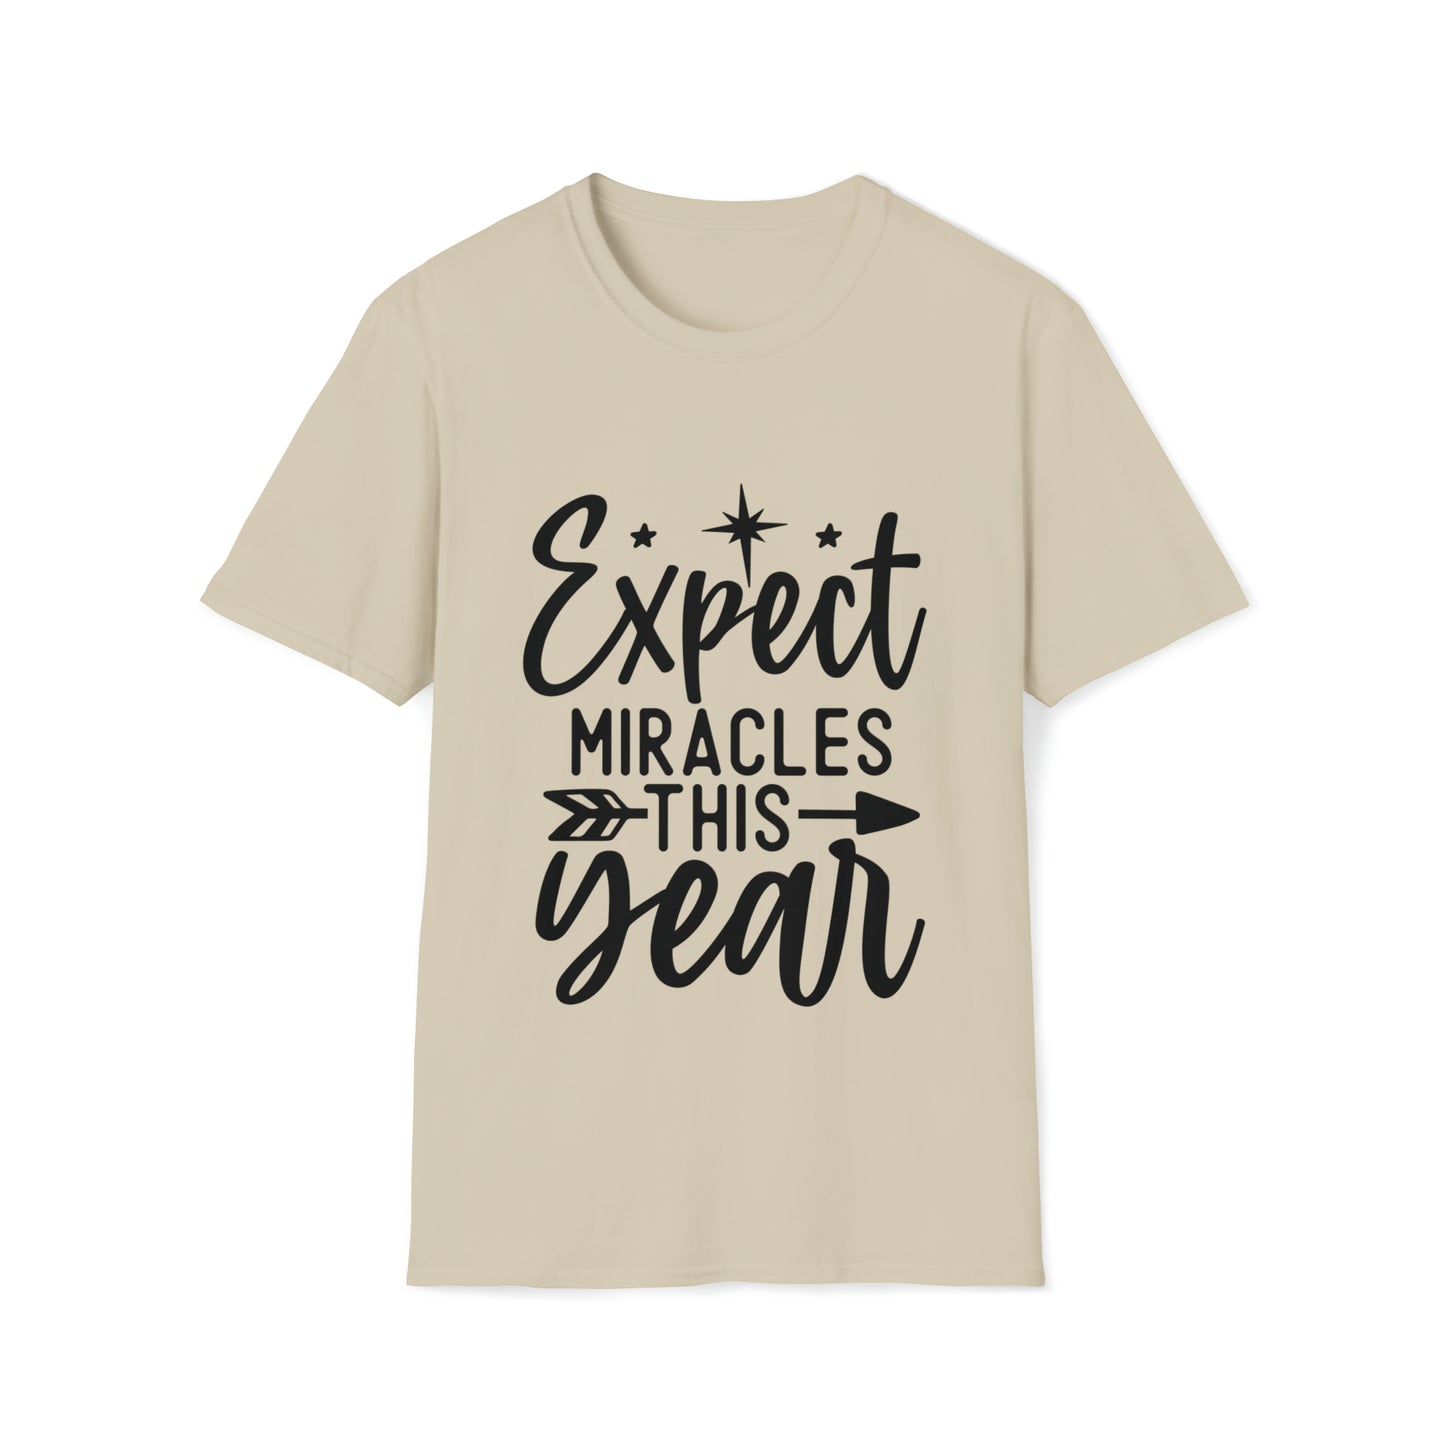 Expect Miracles Unisex Softstyle T-Shirt